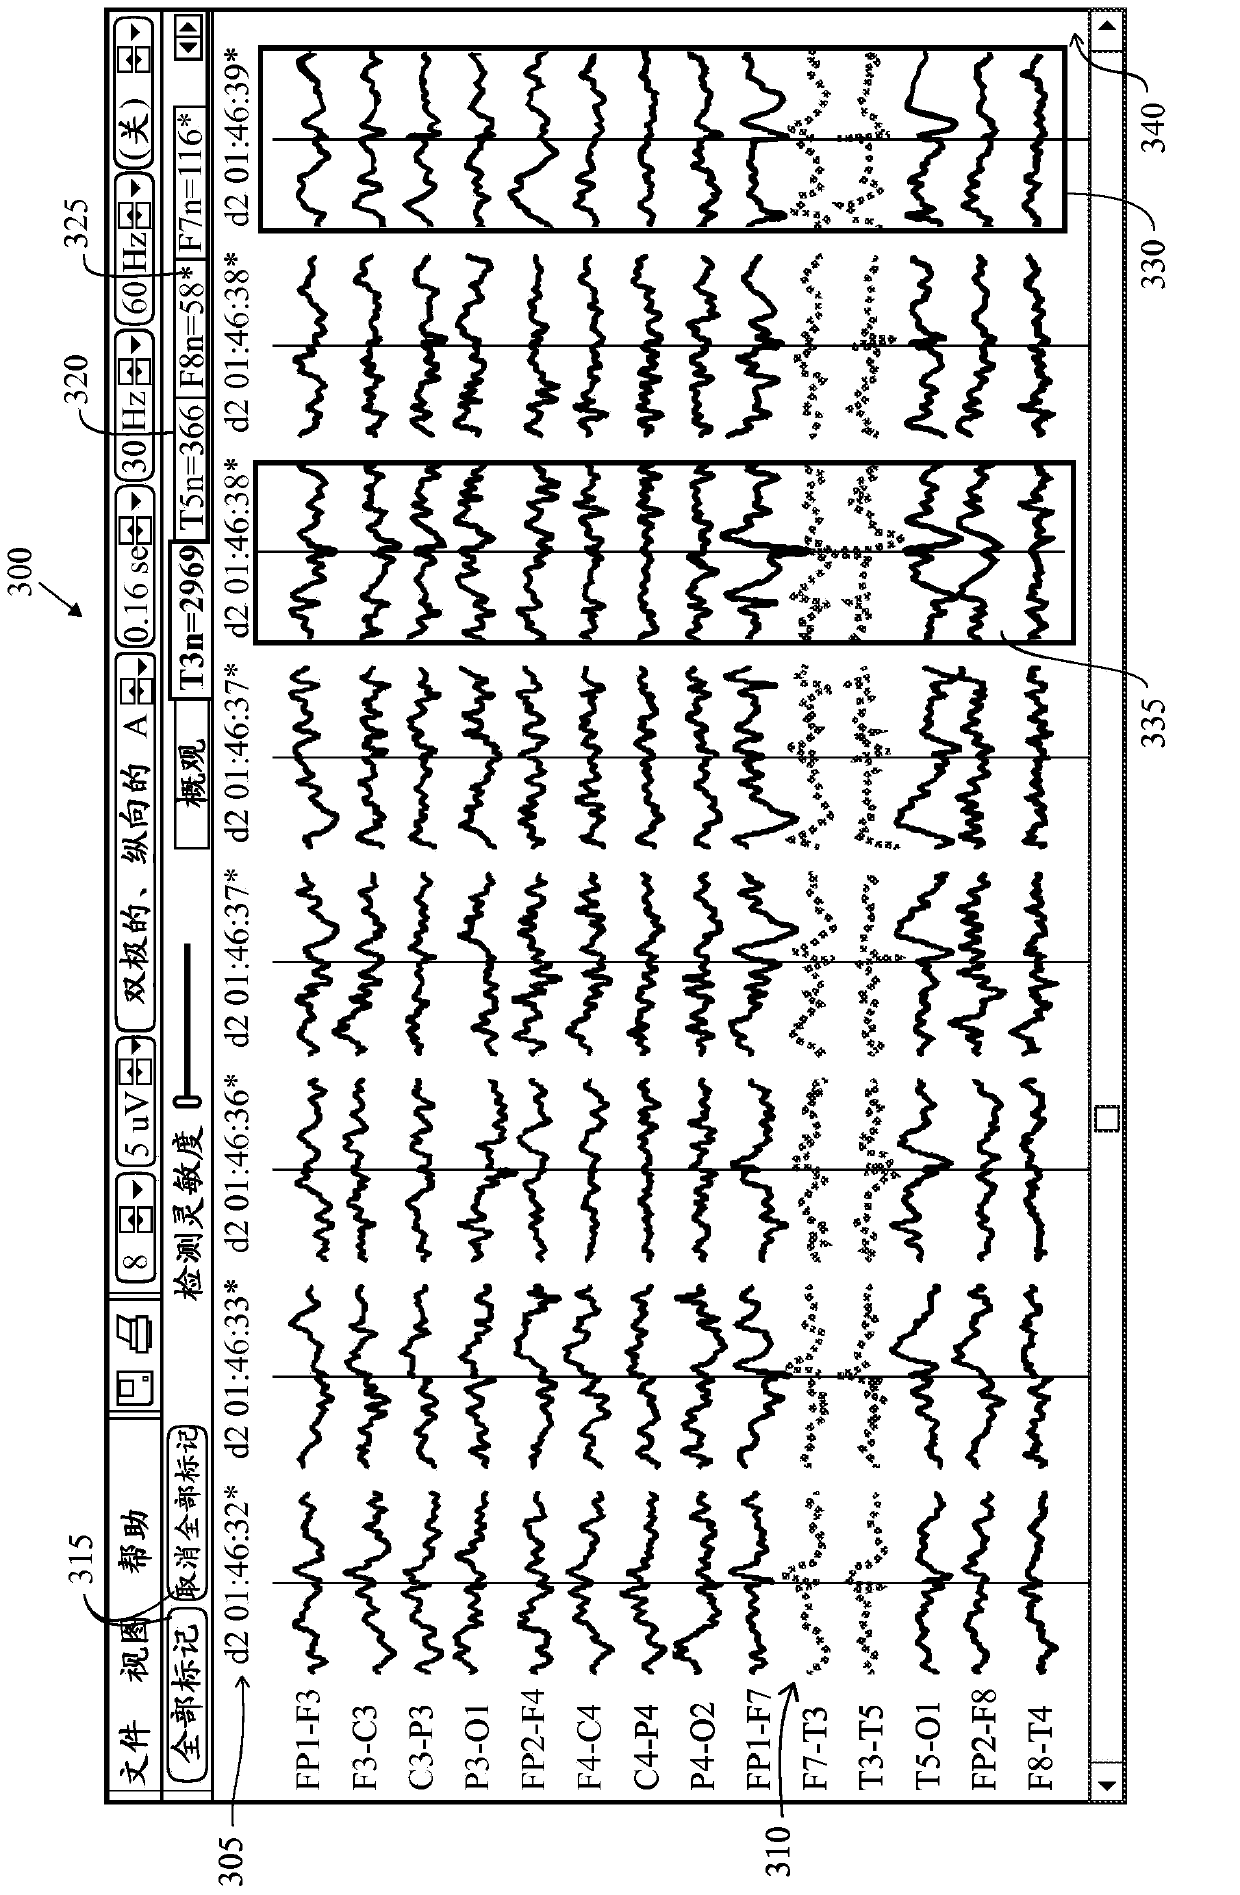 Method and system for analyzing an eeg recording